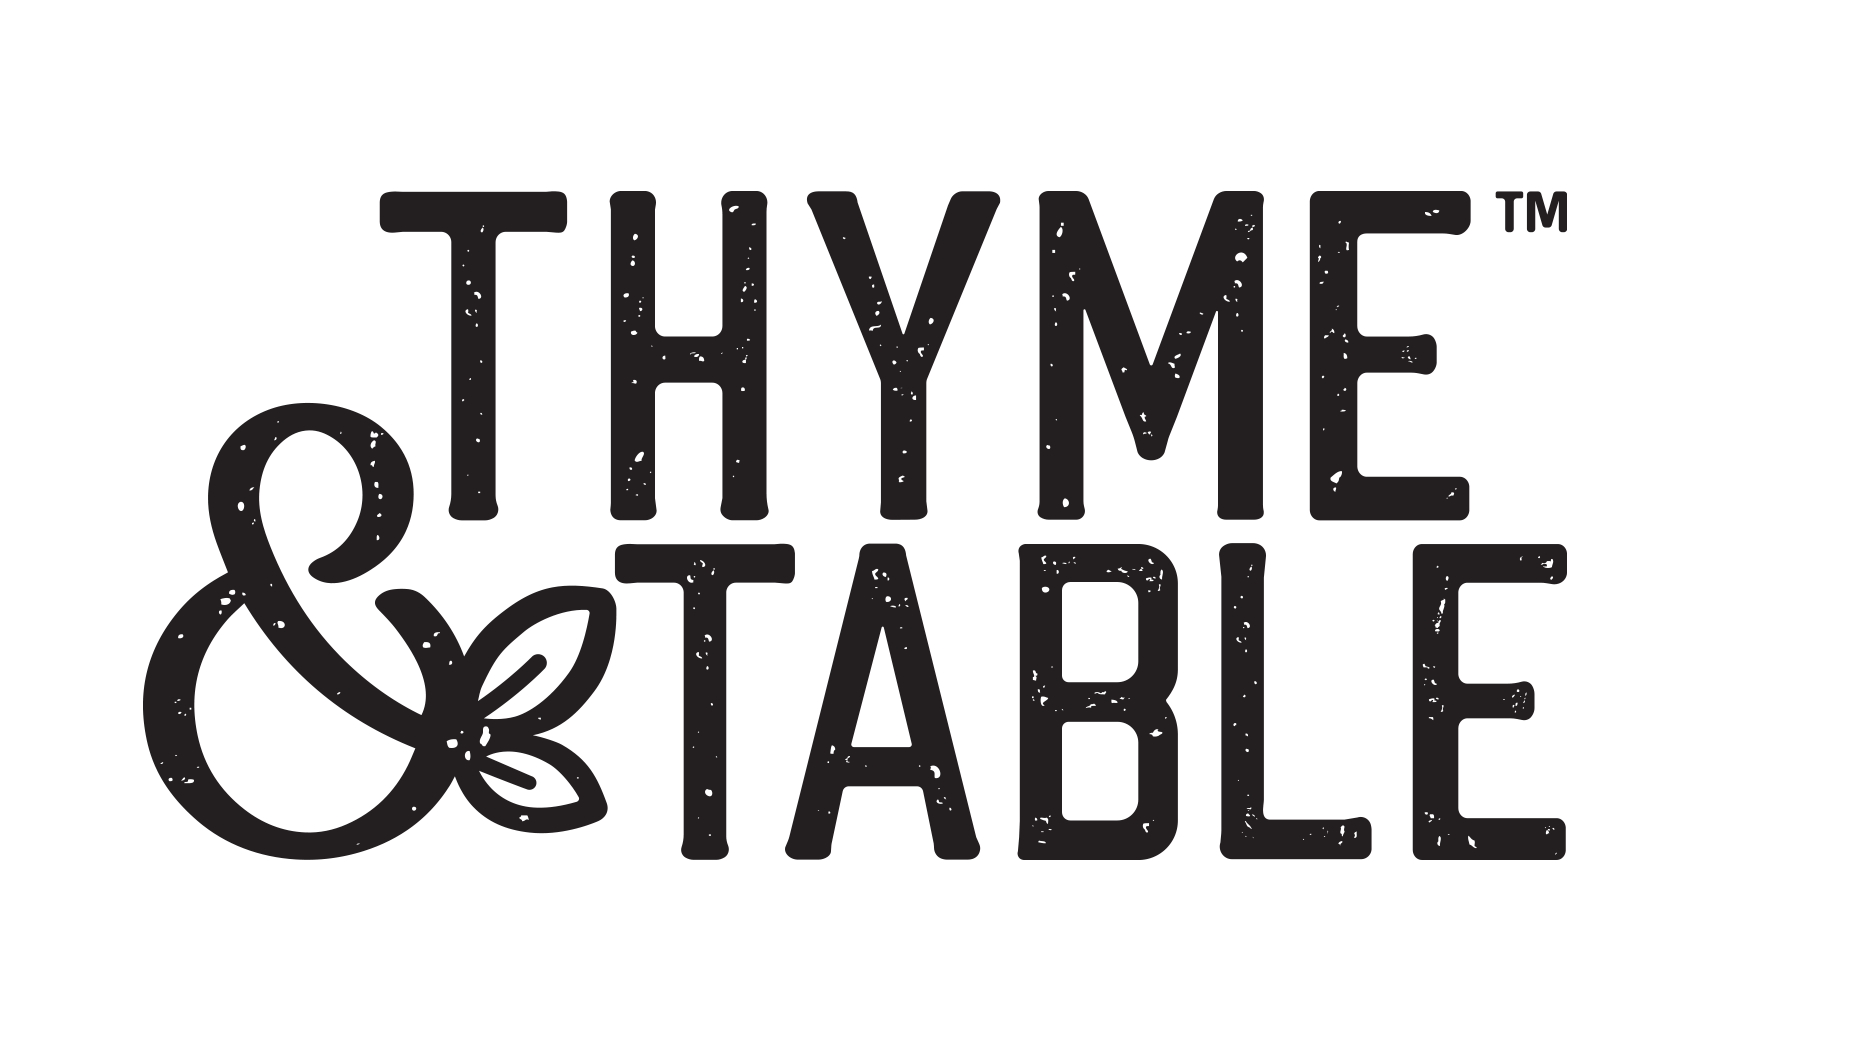 Meal Prep Dot 24-Pc – Thyme&Table